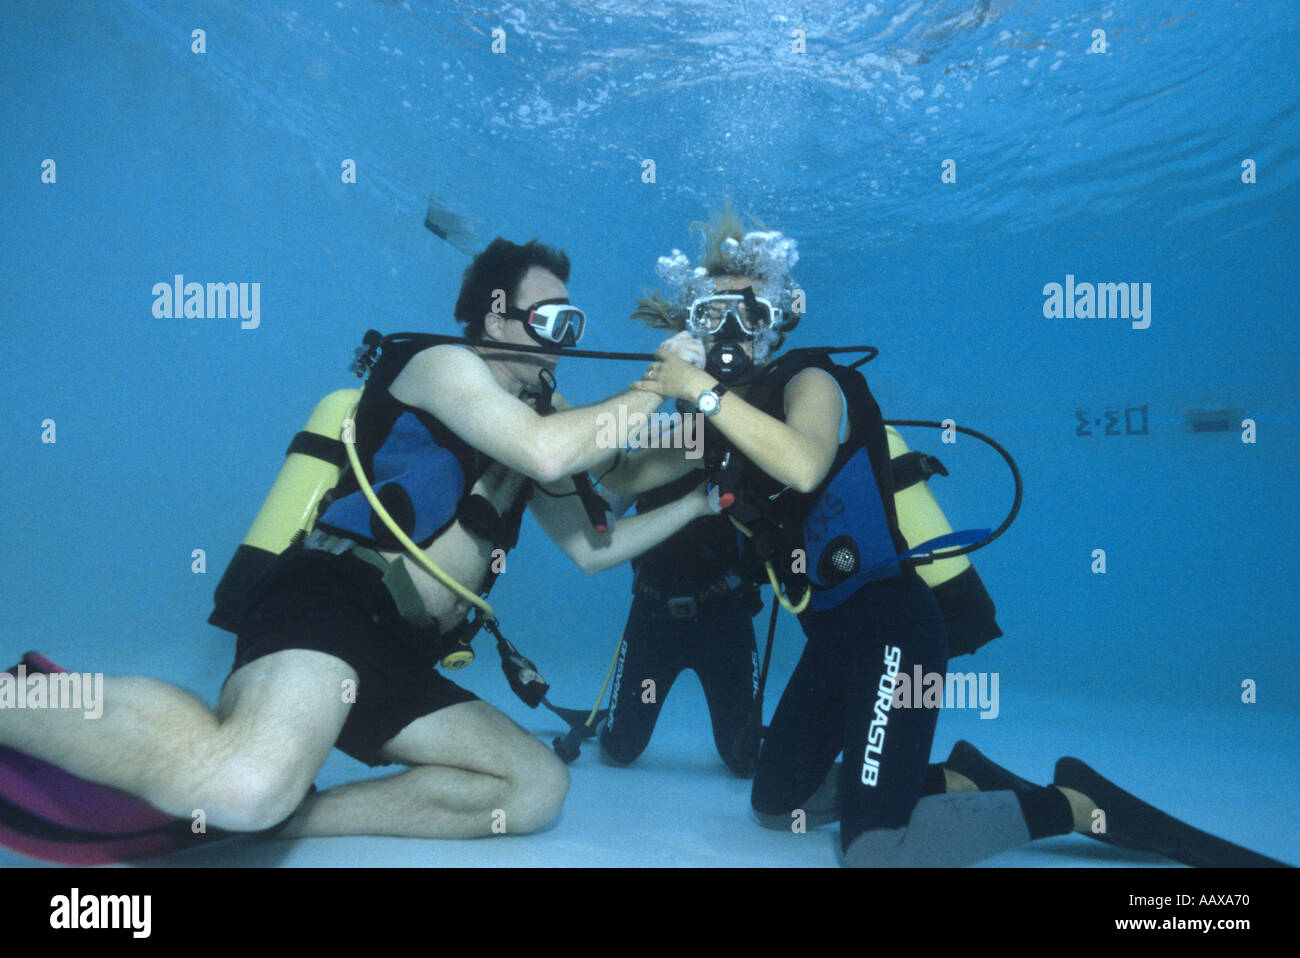 divers practising out of air scenario in swimming pool Stock Photo